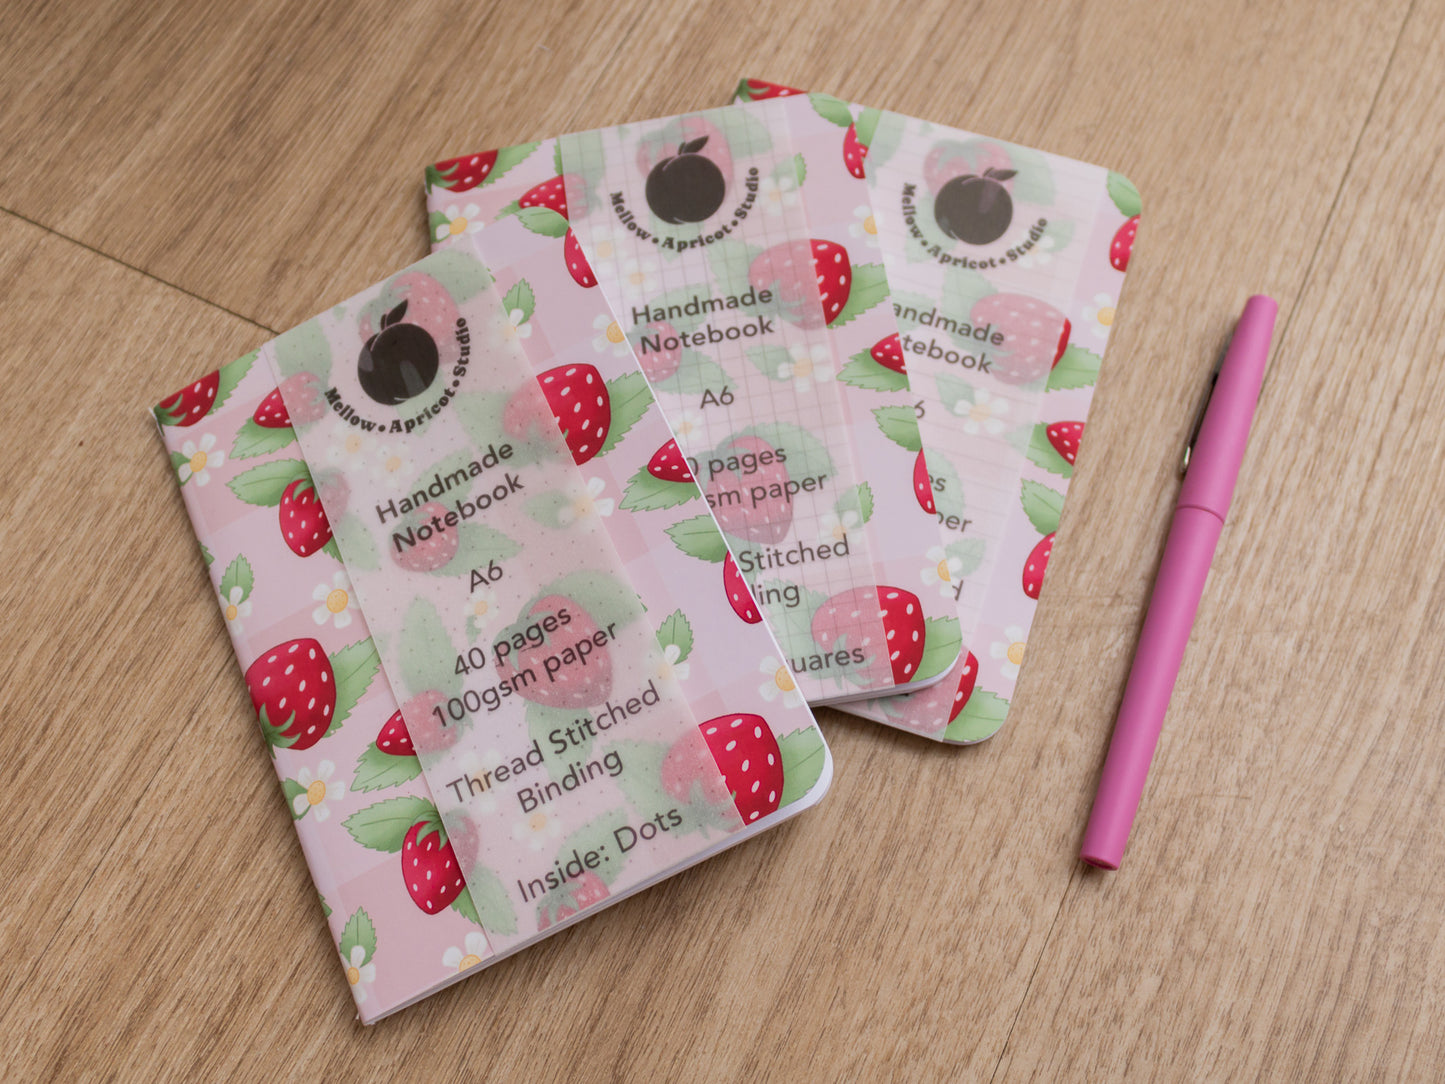 A6 Handmade Notebook with Strawberry Design